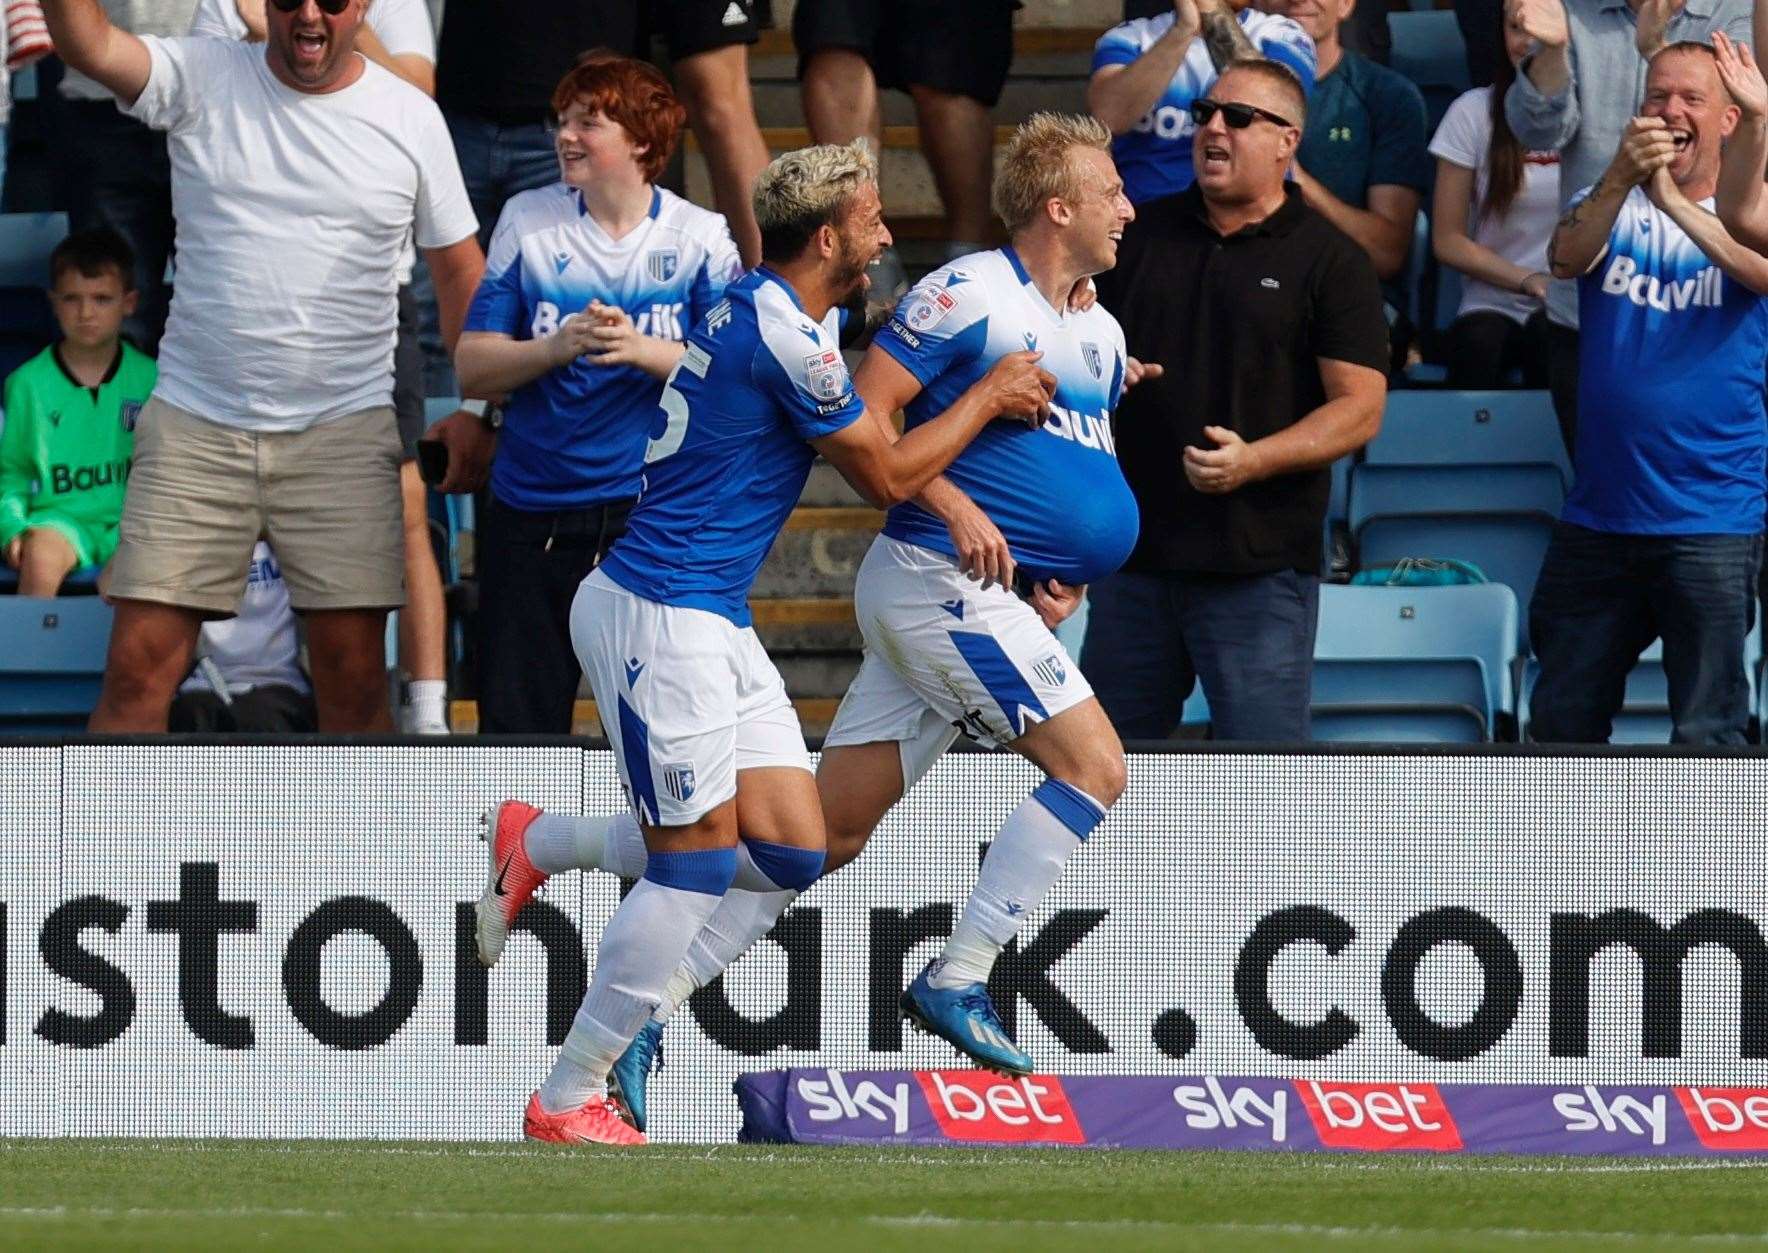 George Lapslie celebrates the opening goal at Priestfield Picture: @Julian_KPI